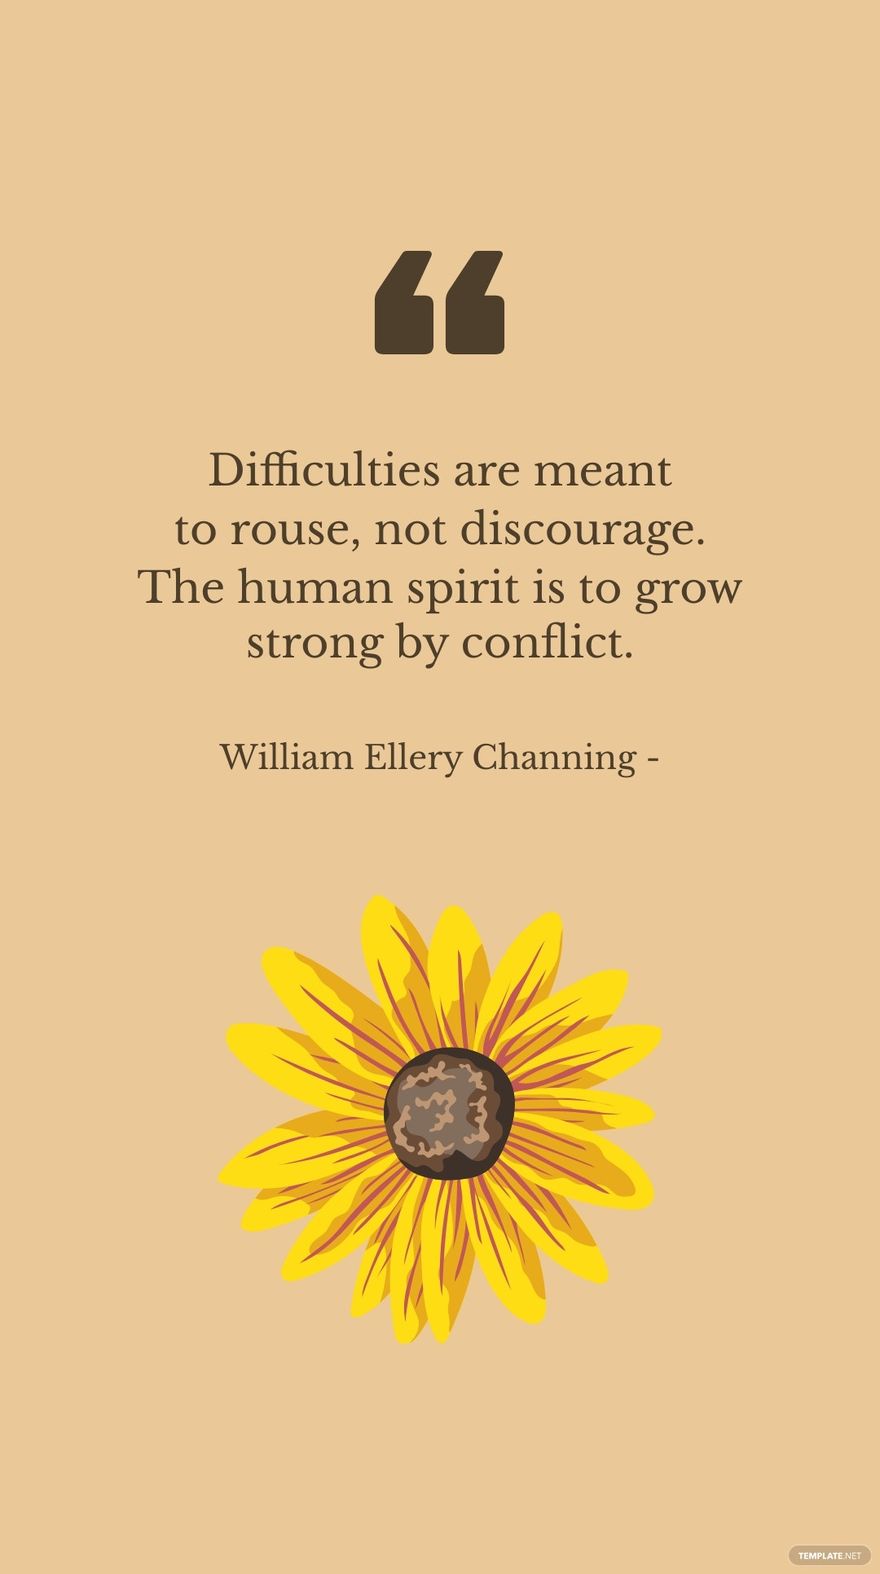 Free William Ellery Channing - Difficulties are meant to rouse, not discourage. The human spirit is to grow strong by conflict. in JPG